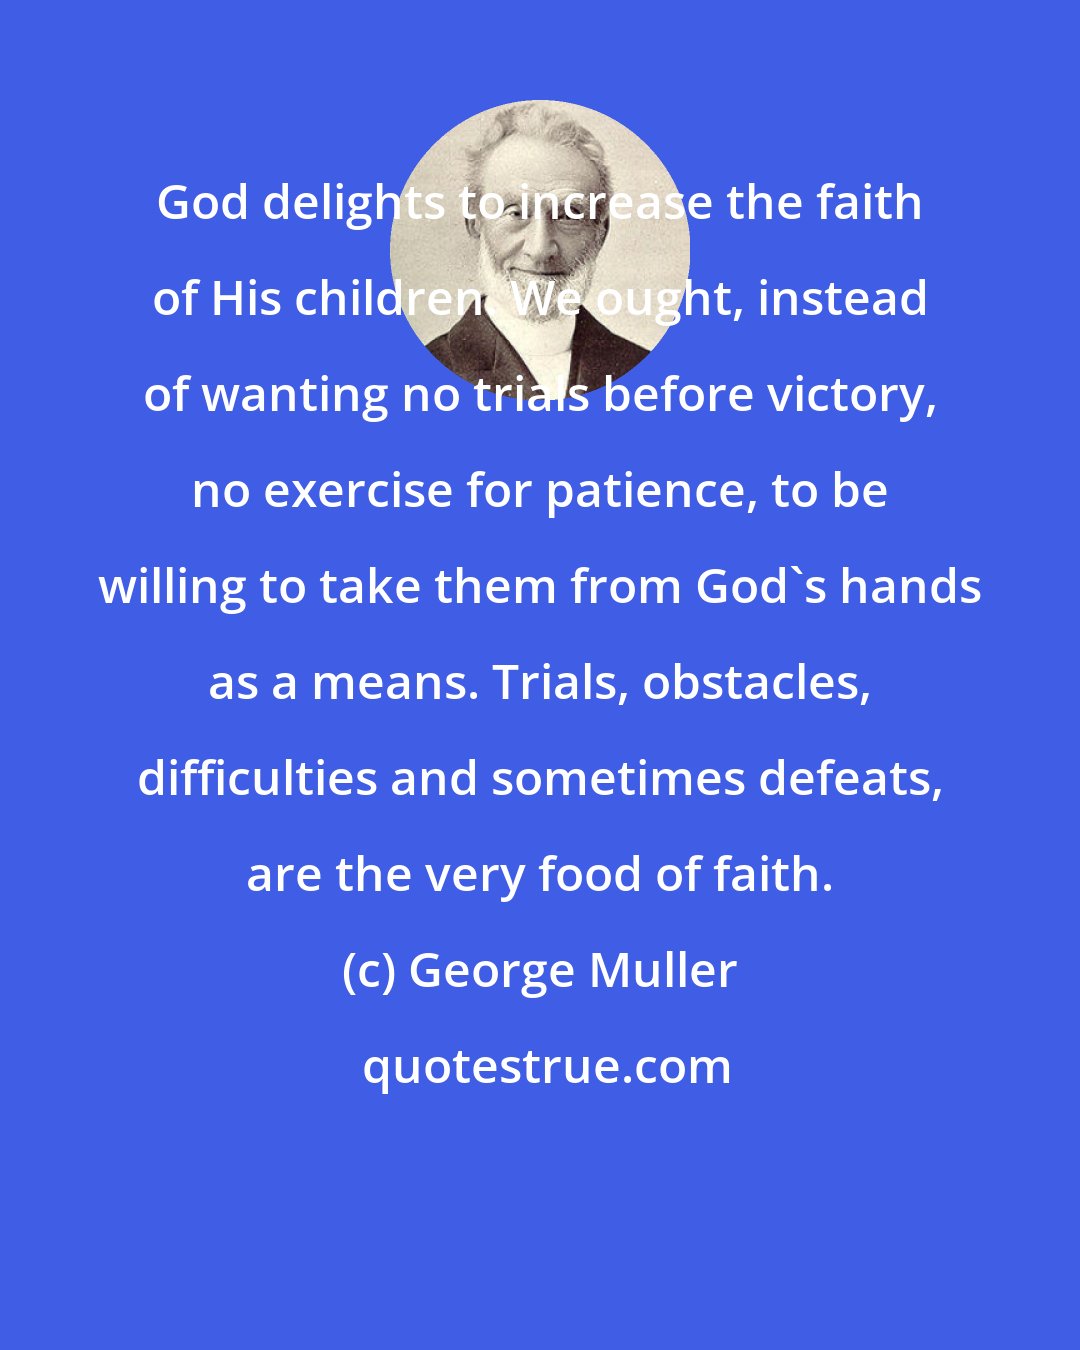 George Muller: God delights to increase the faith of His children. We ought, instead of wanting no trials before victory, no exercise for patience, to be willing to take them from God's hands as a means. Trials, obstacles, difficulties and sometimes defeats, are the very food of faith.